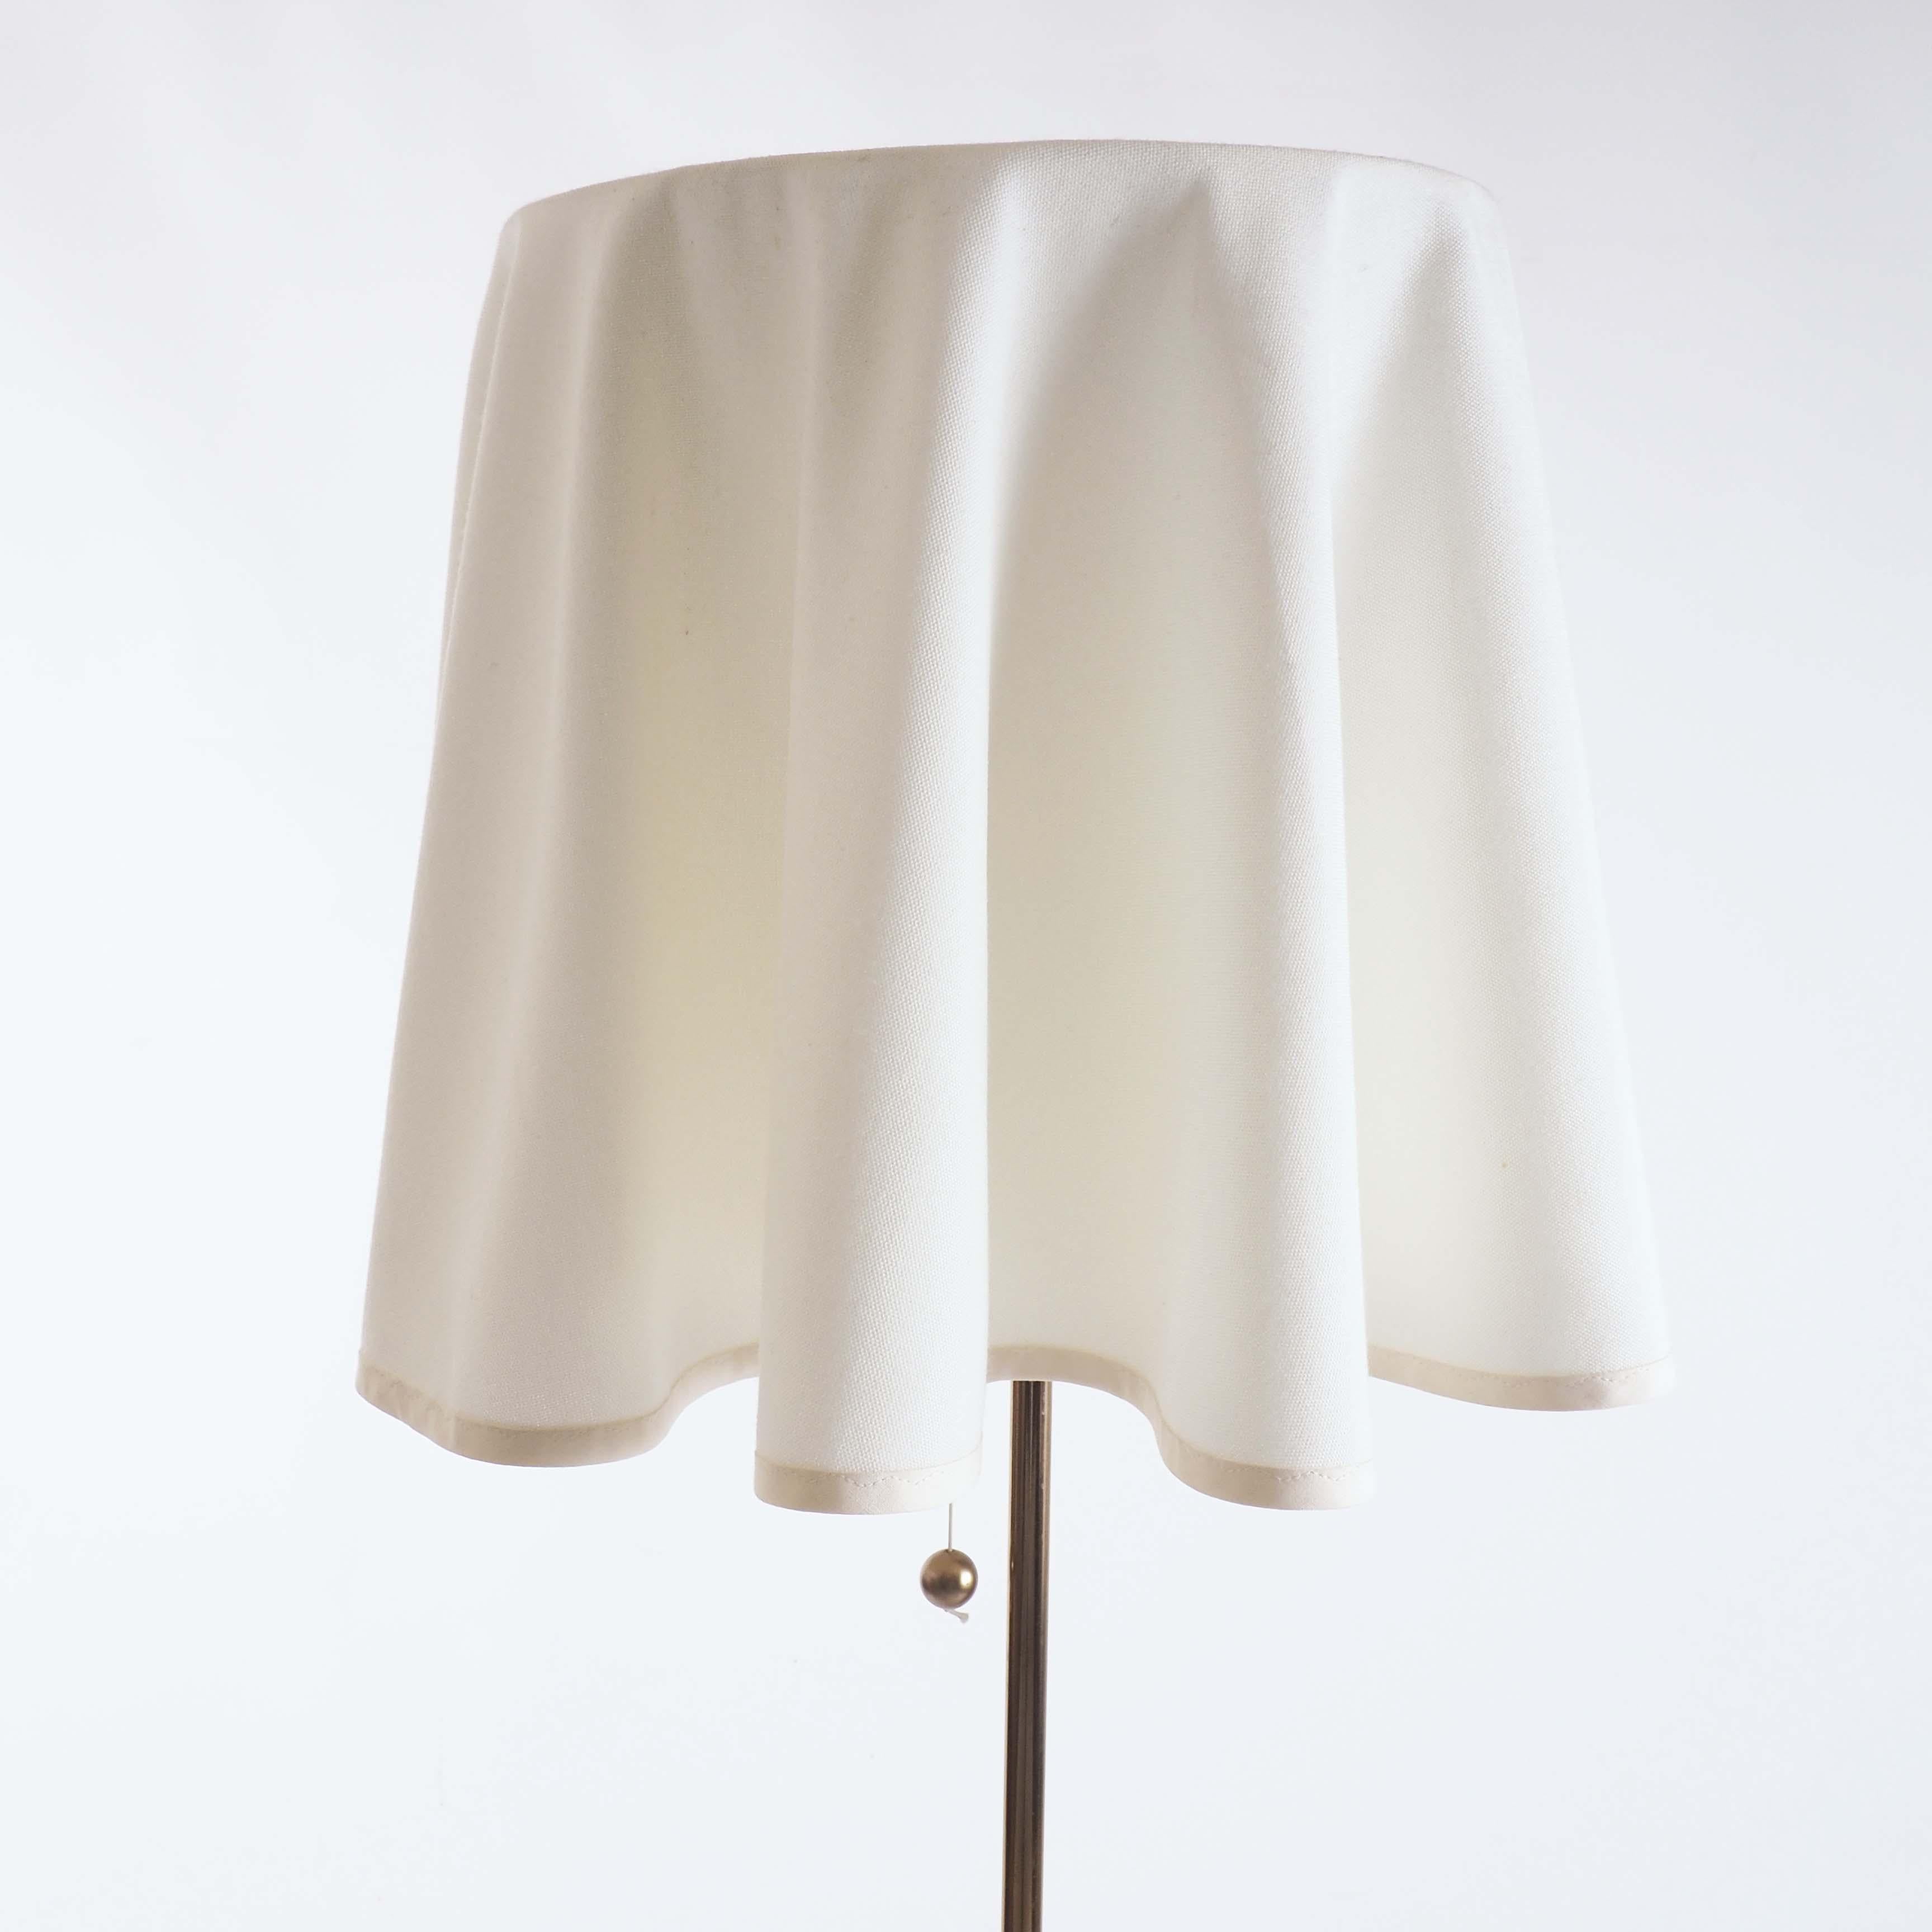 Floor lamp by Bergboms, Sweden in brass and original fabric.